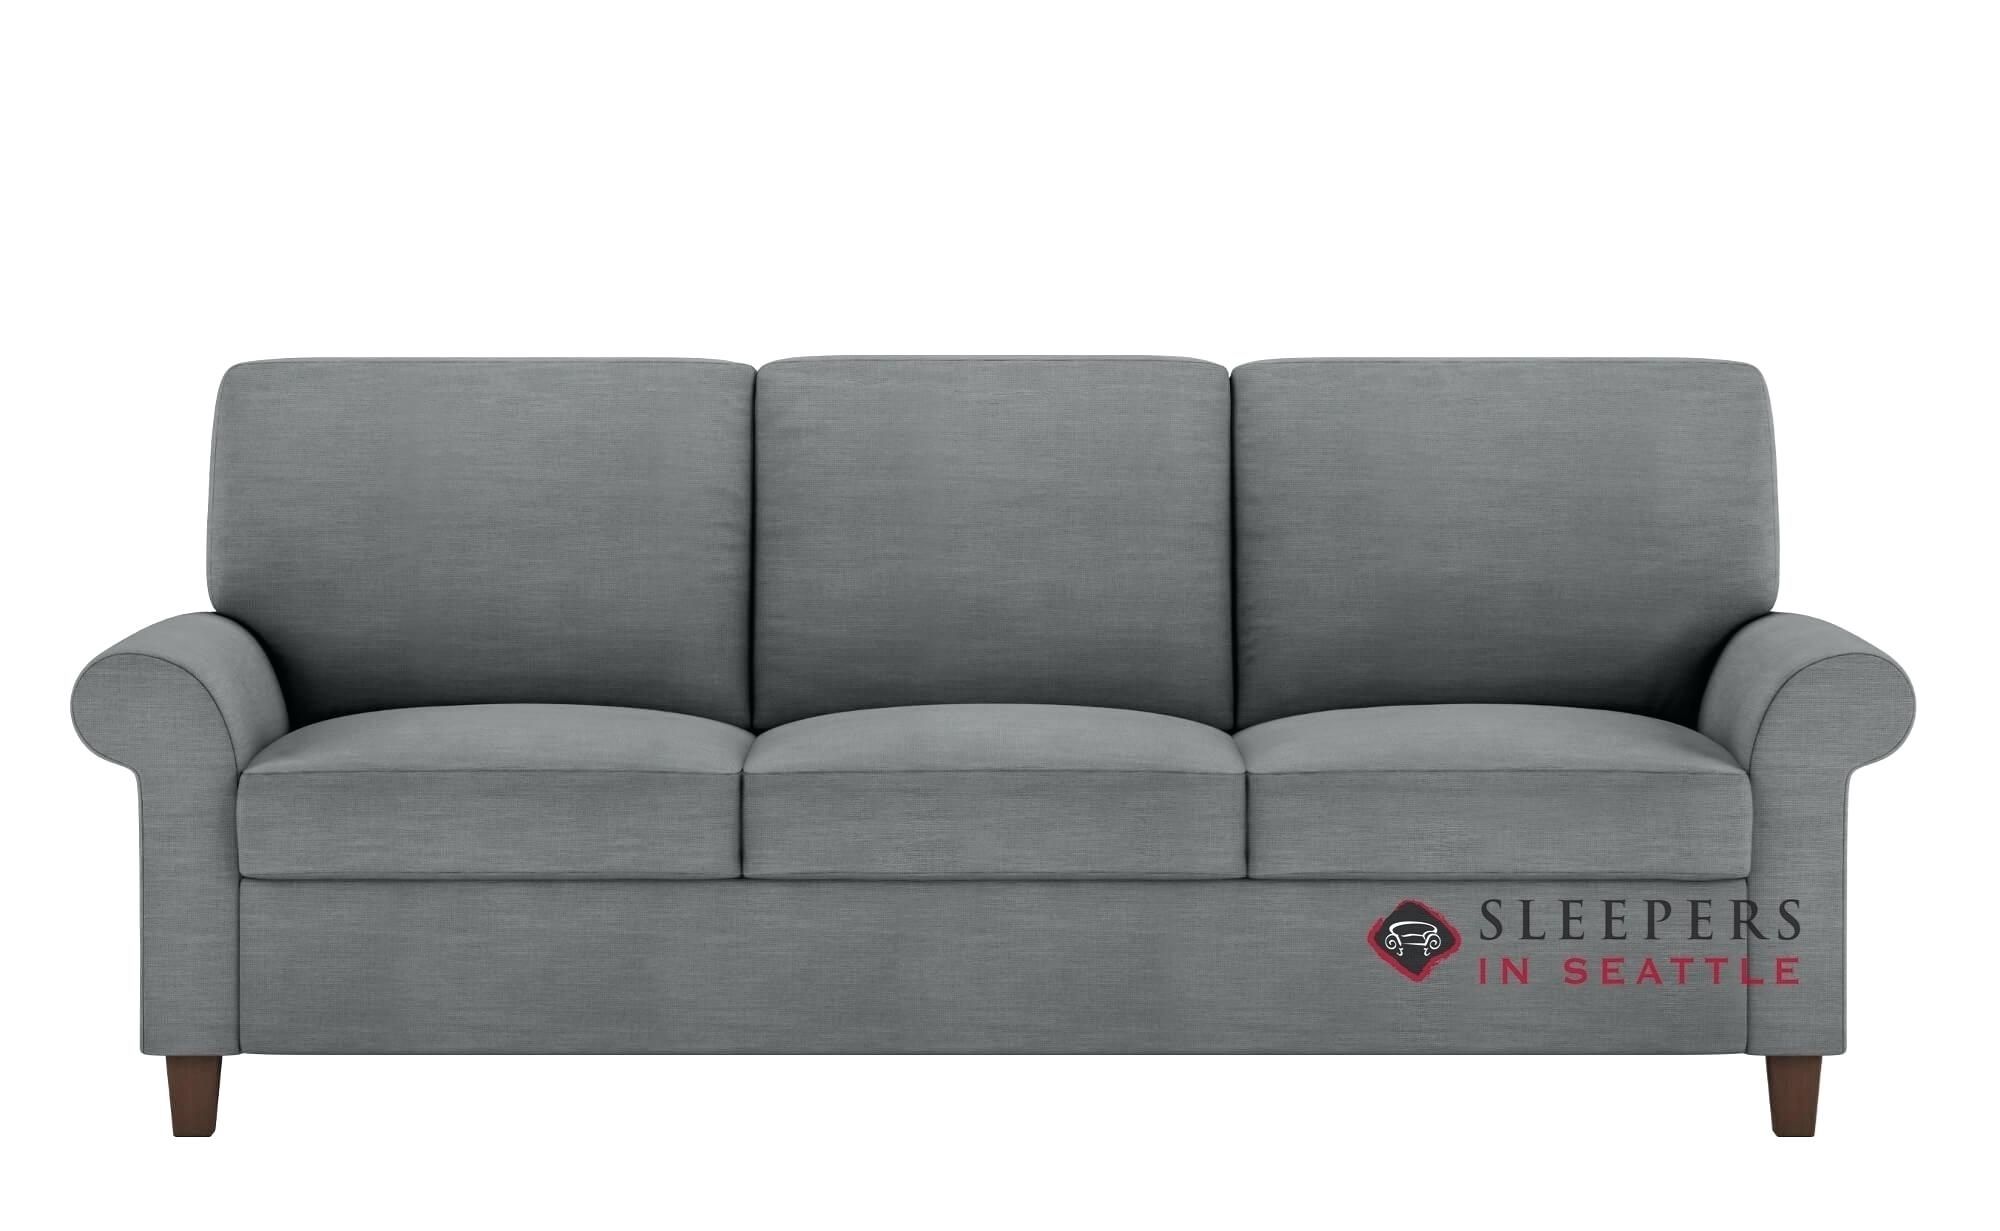 Small Corner Sectional Couch Nz Sofa Ikea For Bedroom – Skipset Throughout Nz Sectional Sofas (View 4 of 10)